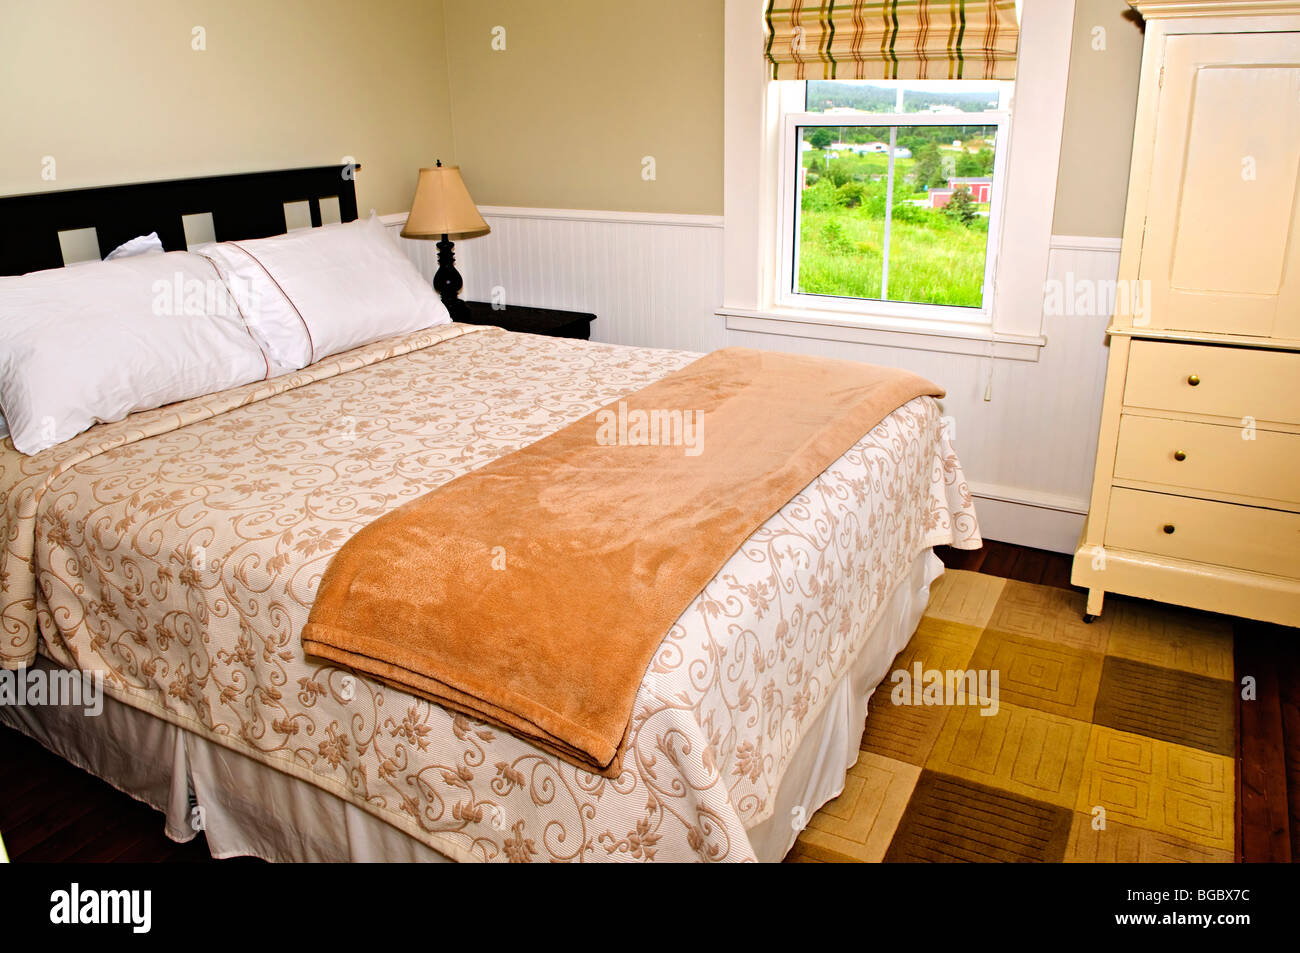 Bedroom interior with comfortable queen size bed with view Stock Photo